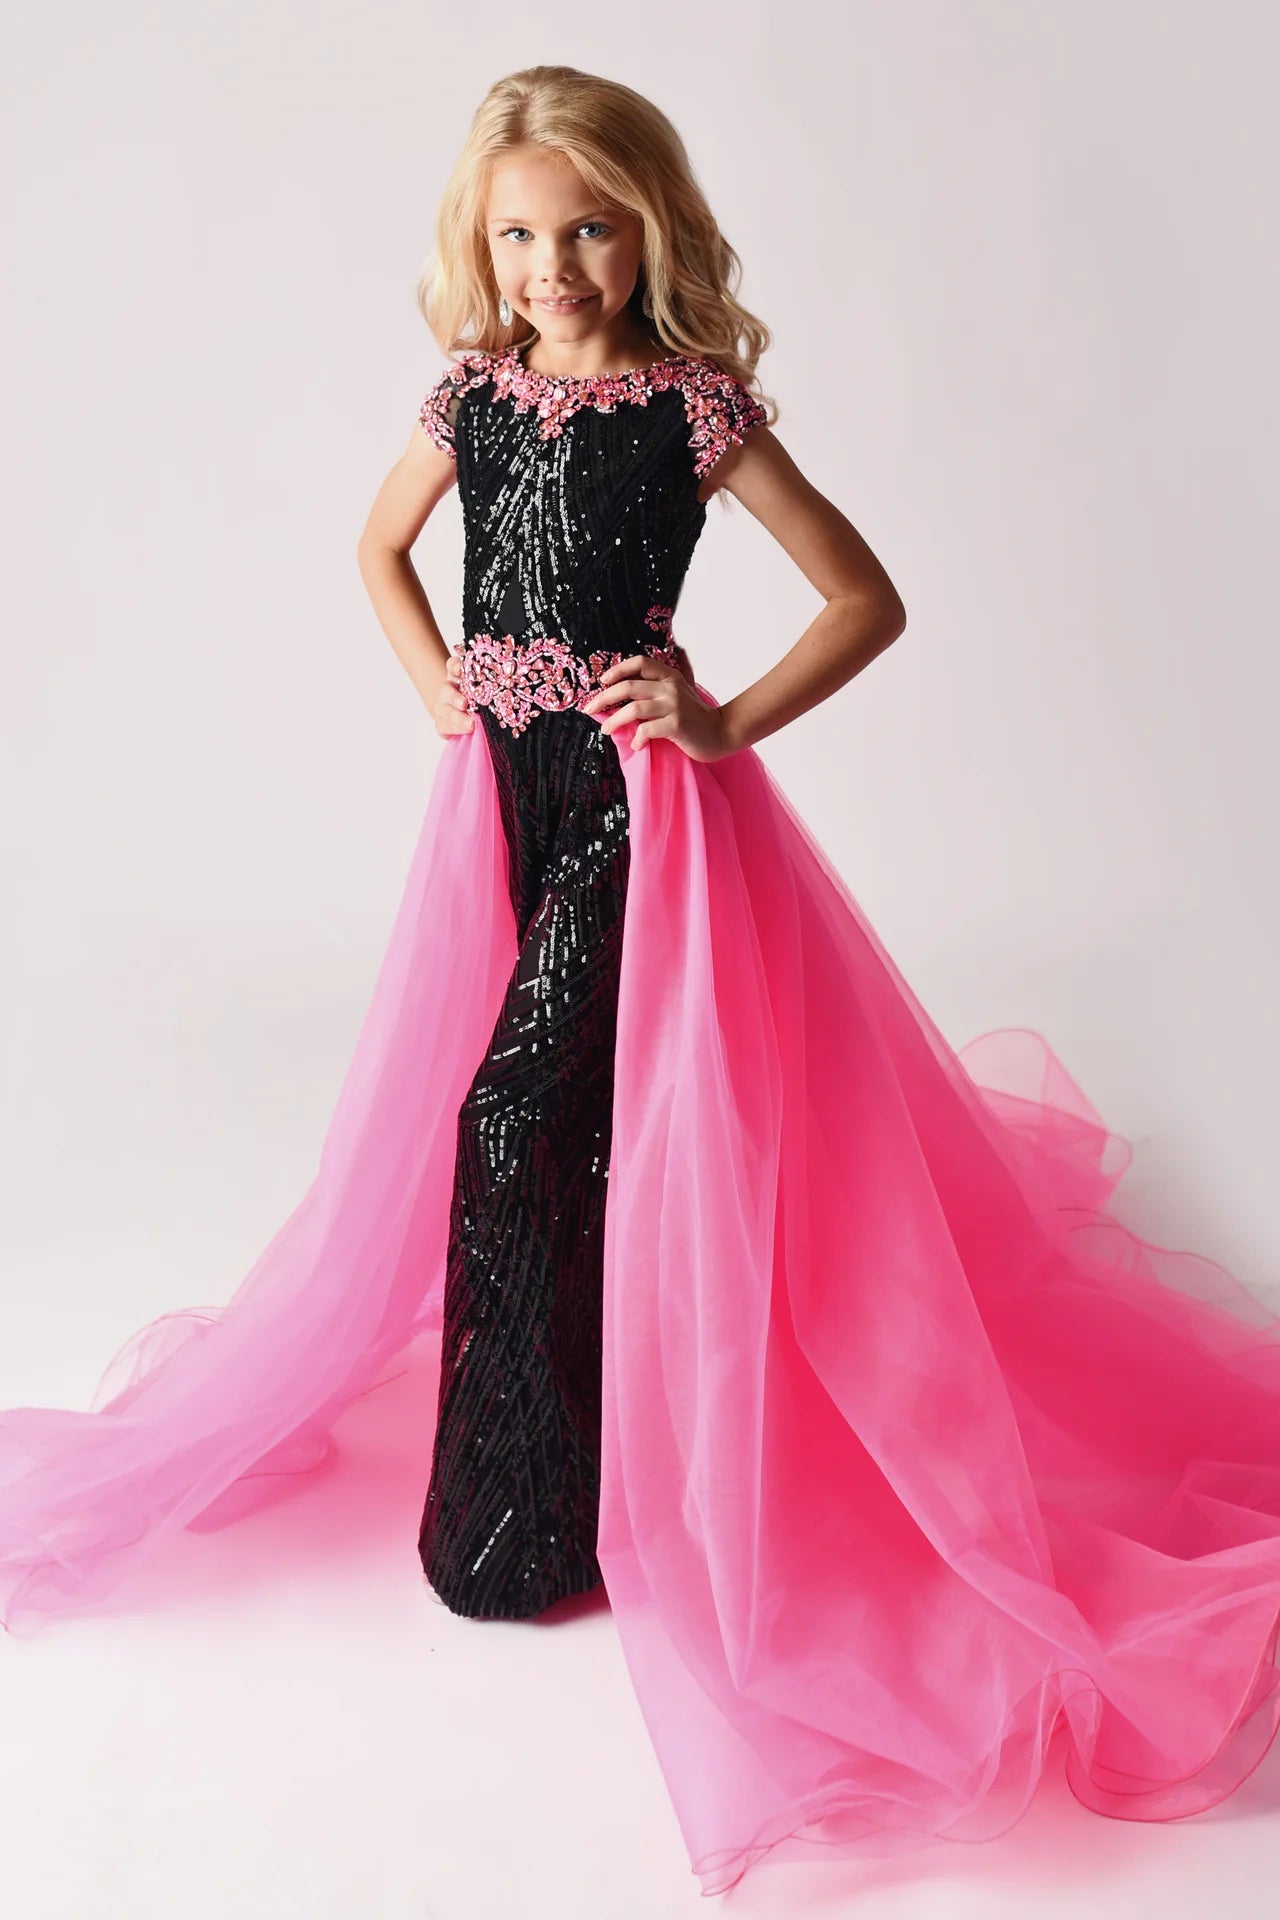 The Ava Presley 38026 Long Sequin Girls Jumpsuit features an exquisite beaded sleeve and overskirt design and is crafted of a fun and fashionable sequin fabric. It is designed to give your little girl maximum comfort, while turning up the wow factor.  Size: 2-16  Colors: Black/Hot Pink, Black/Light Blue